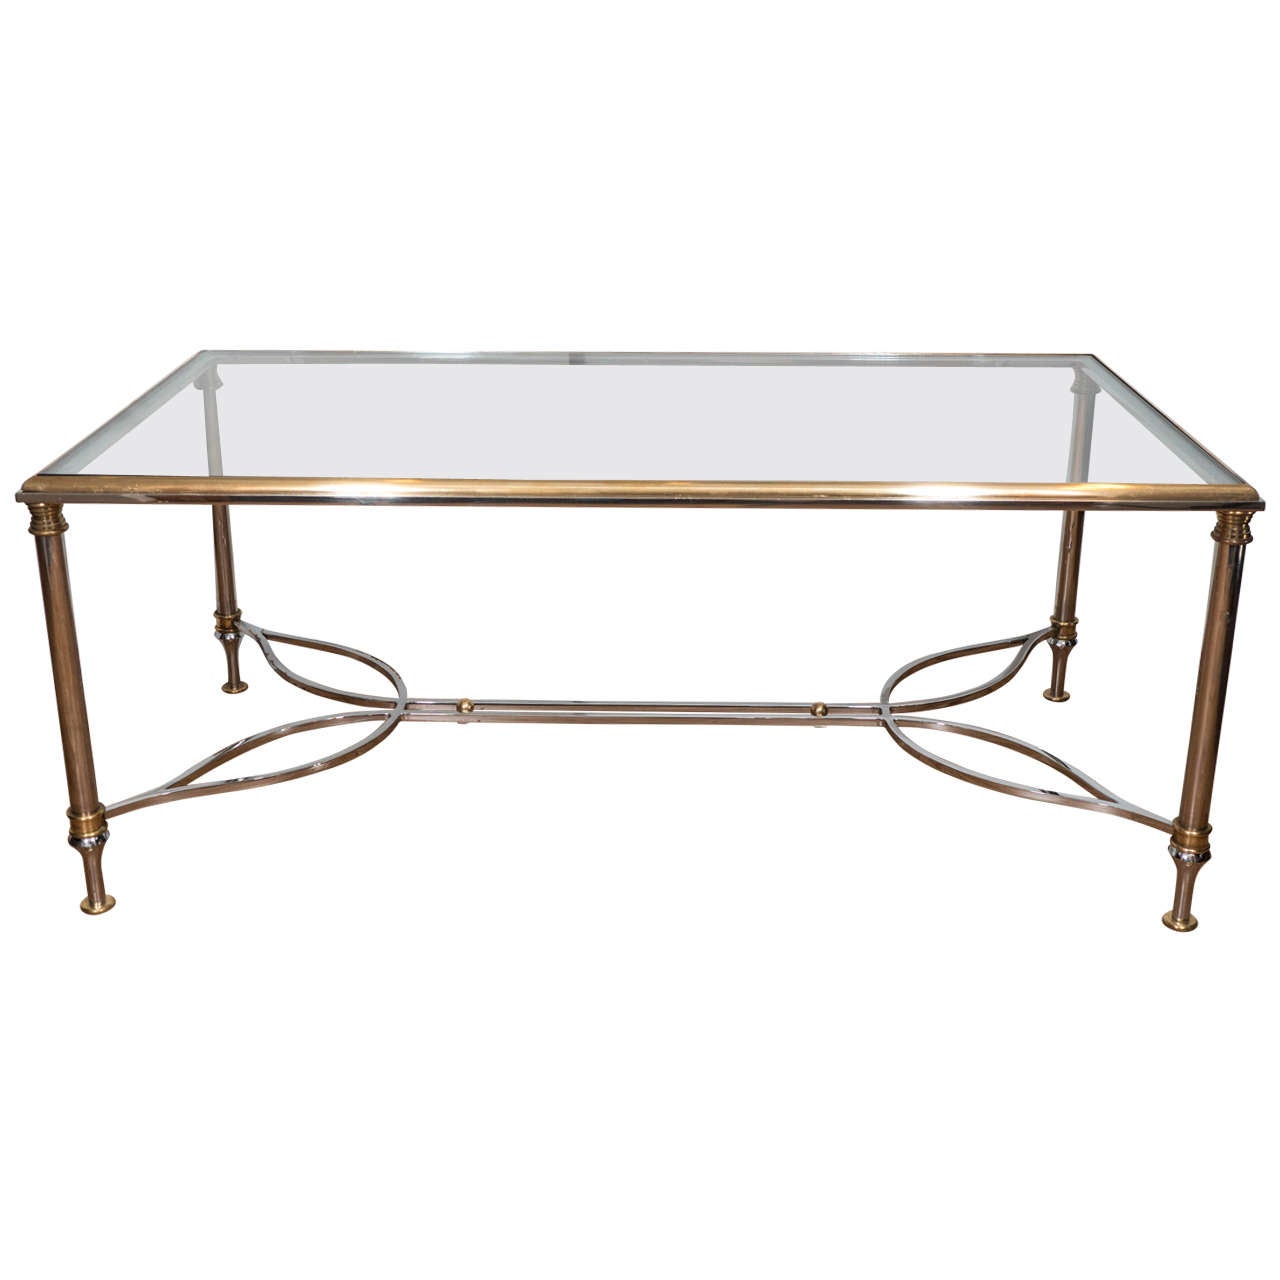 1970s Brass Rectangular Coffee and Cocktail Table with Elegant Chrome Base